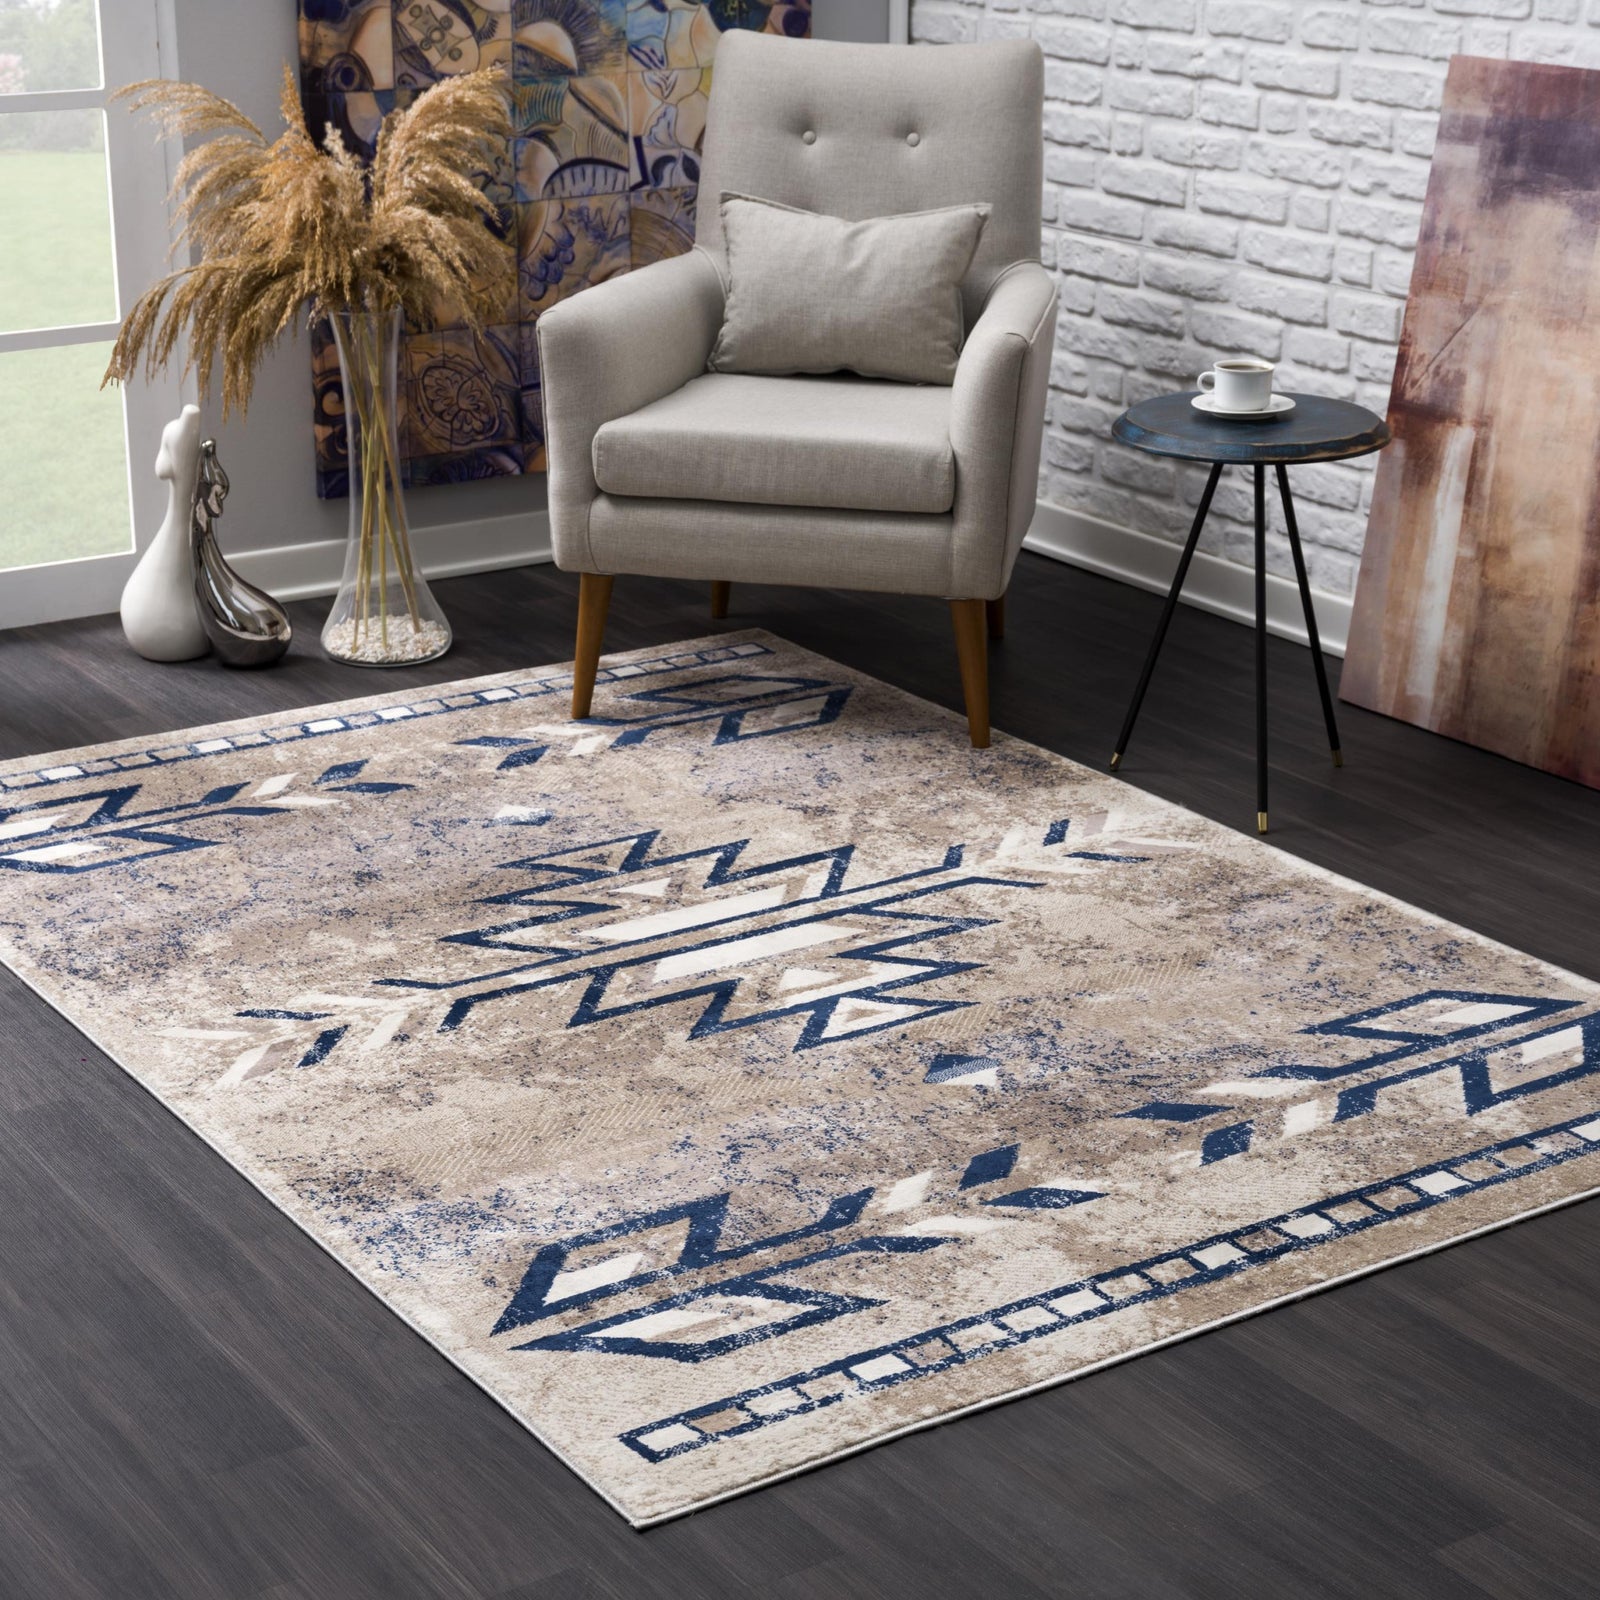 2’ X 3’ Beige And Blue Boho Chic Scatter Rug